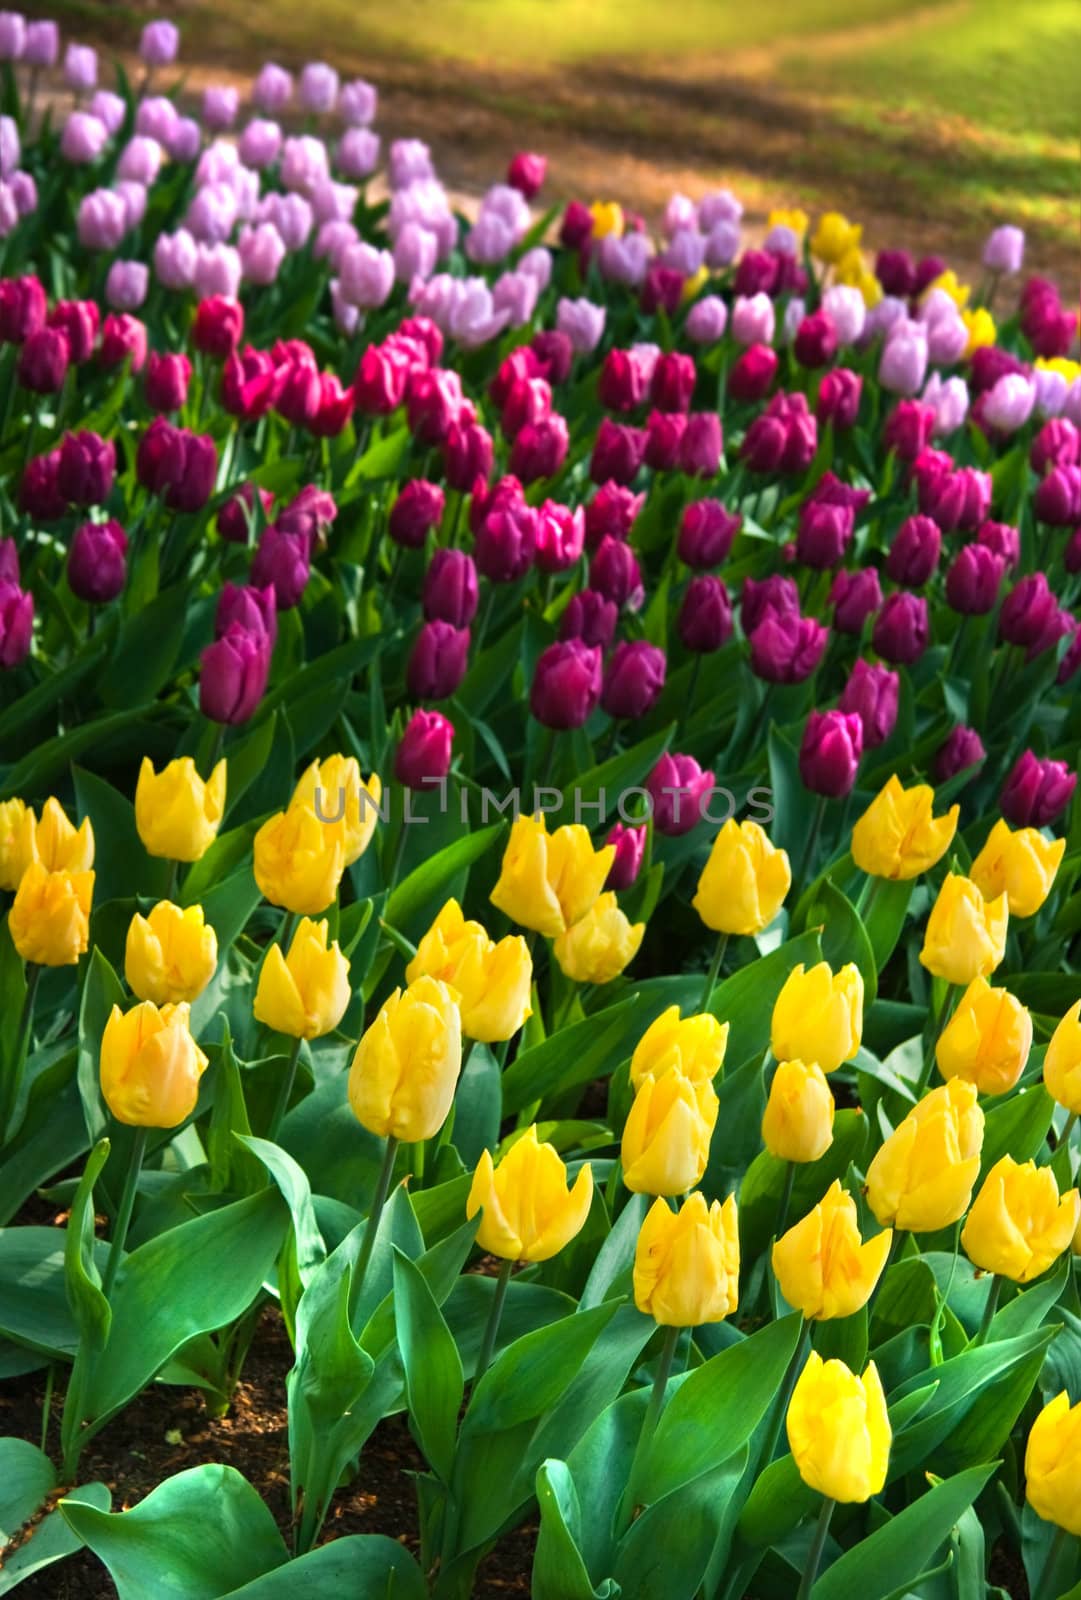 Arrangement of lilac, purple and yellow tulips in garden in spring